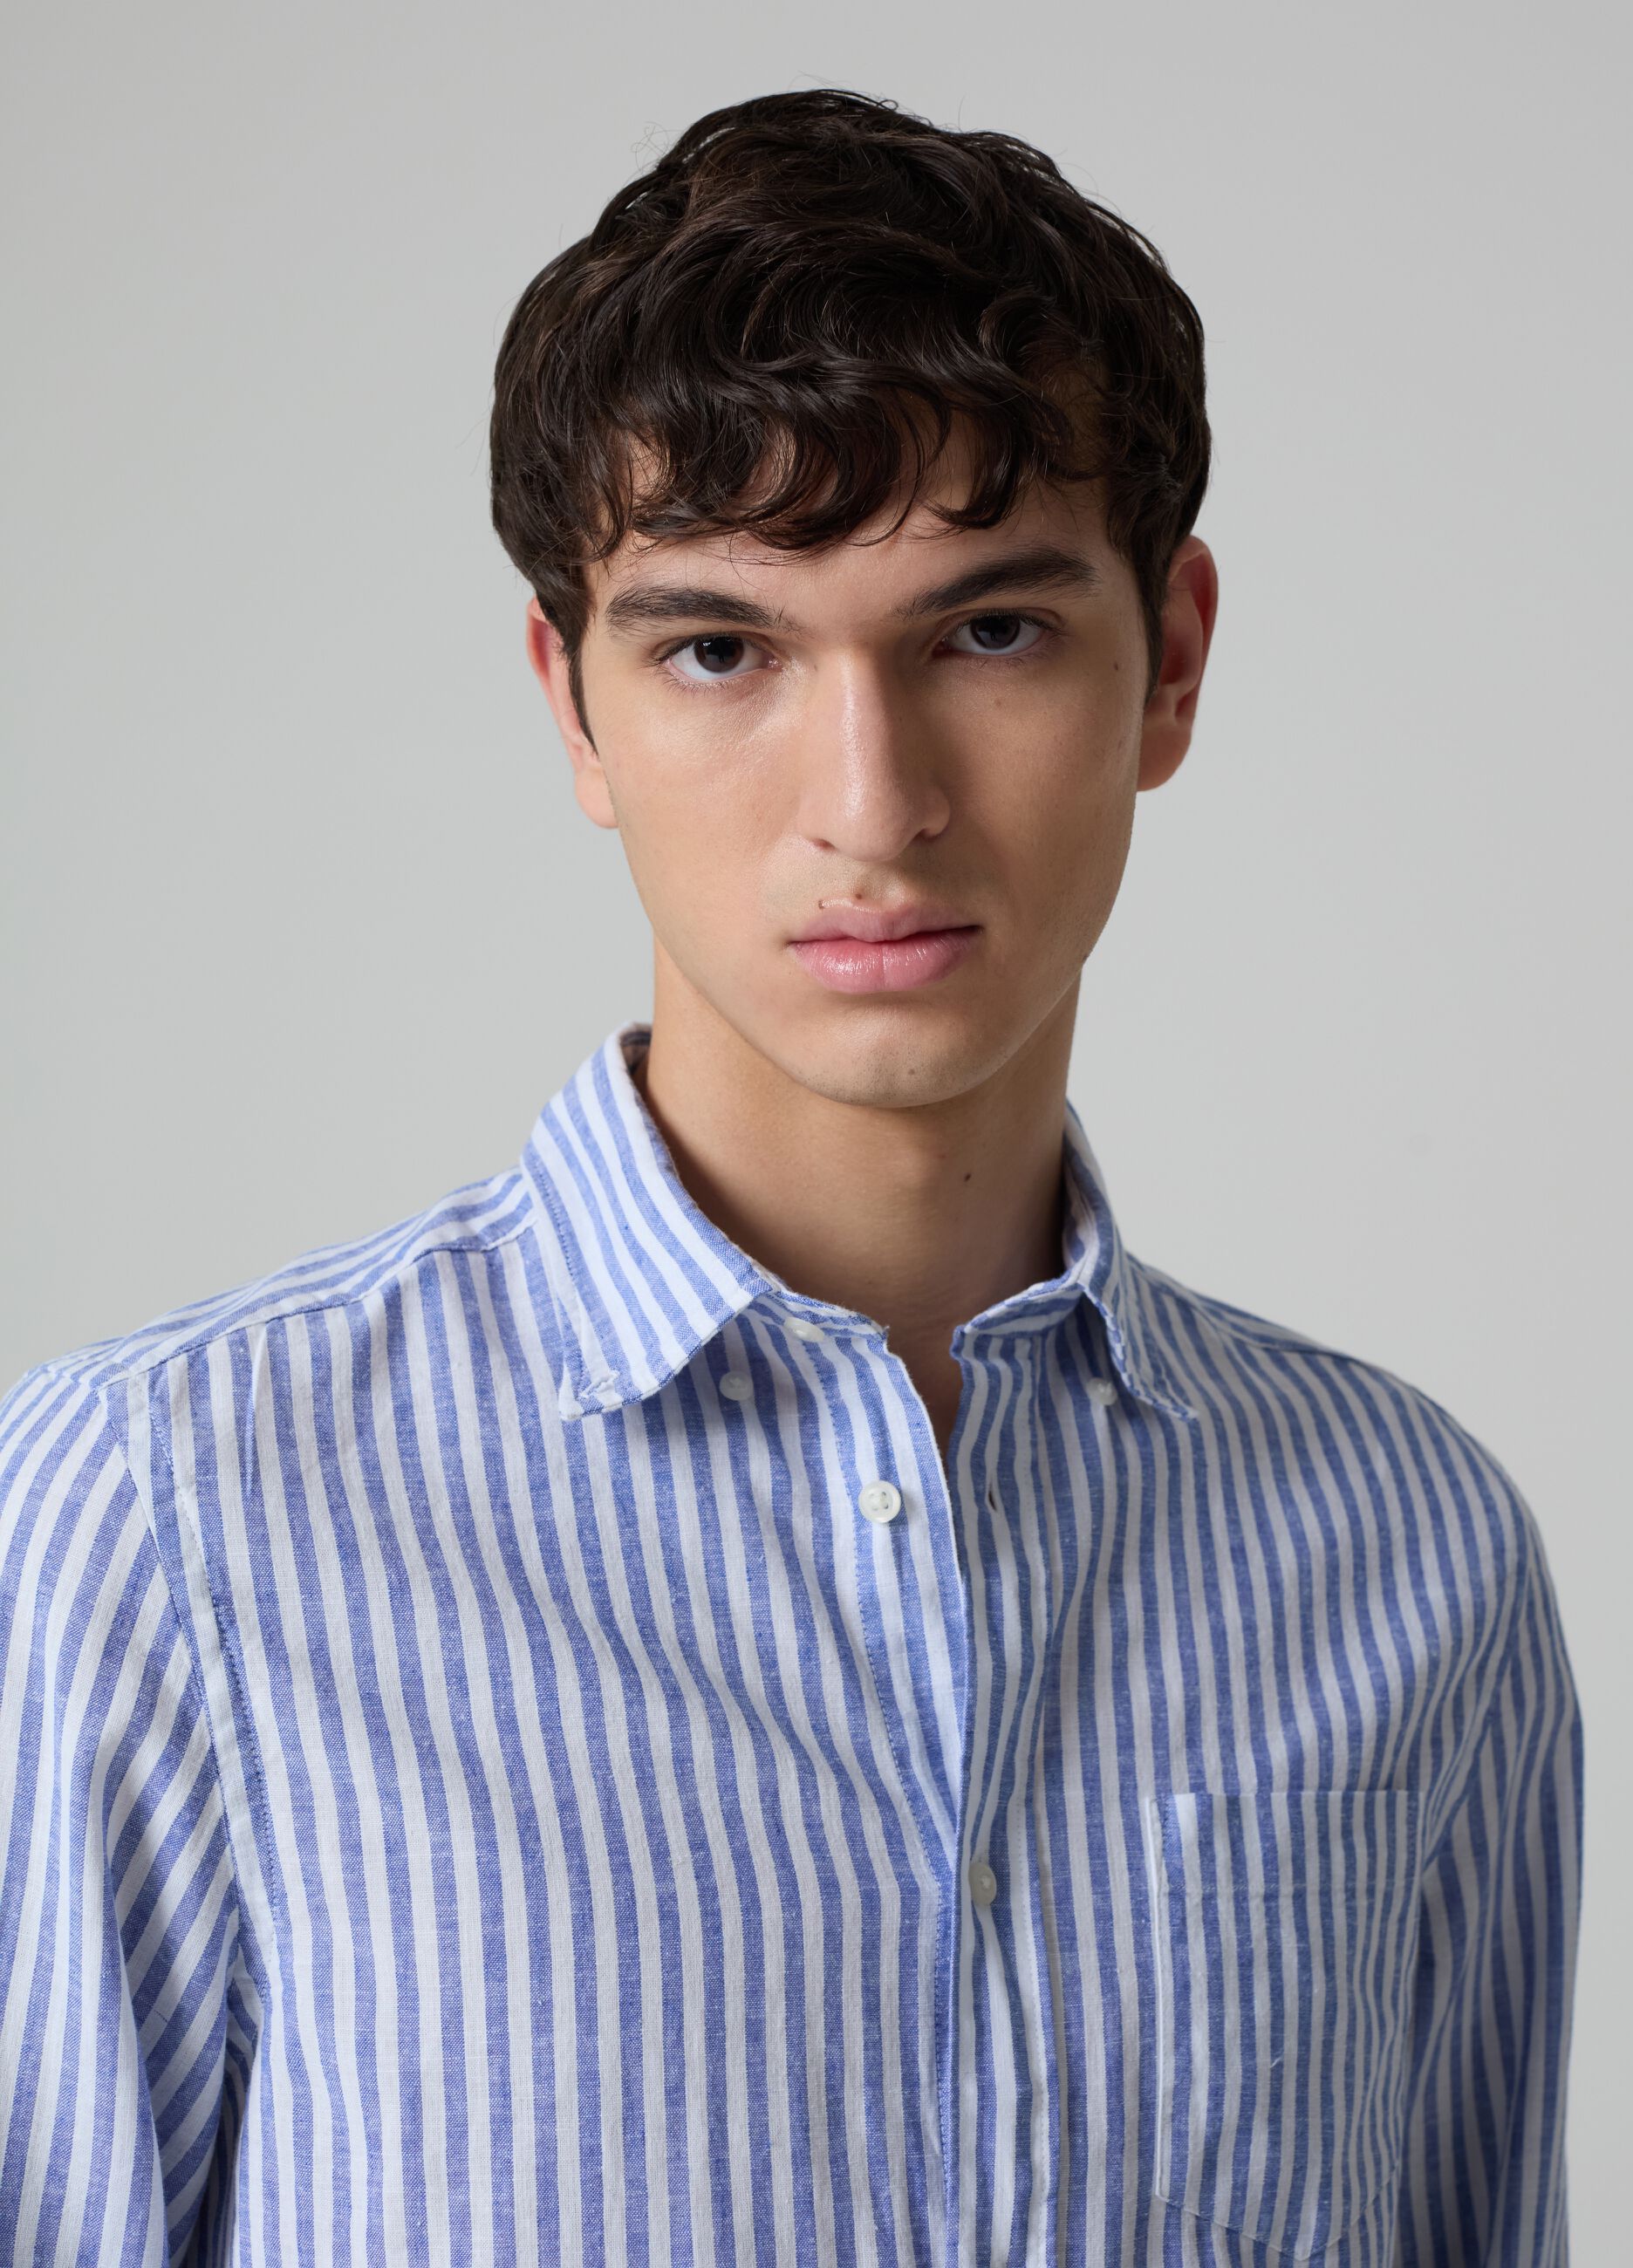 Regular-fit striped shirt with button-down collar